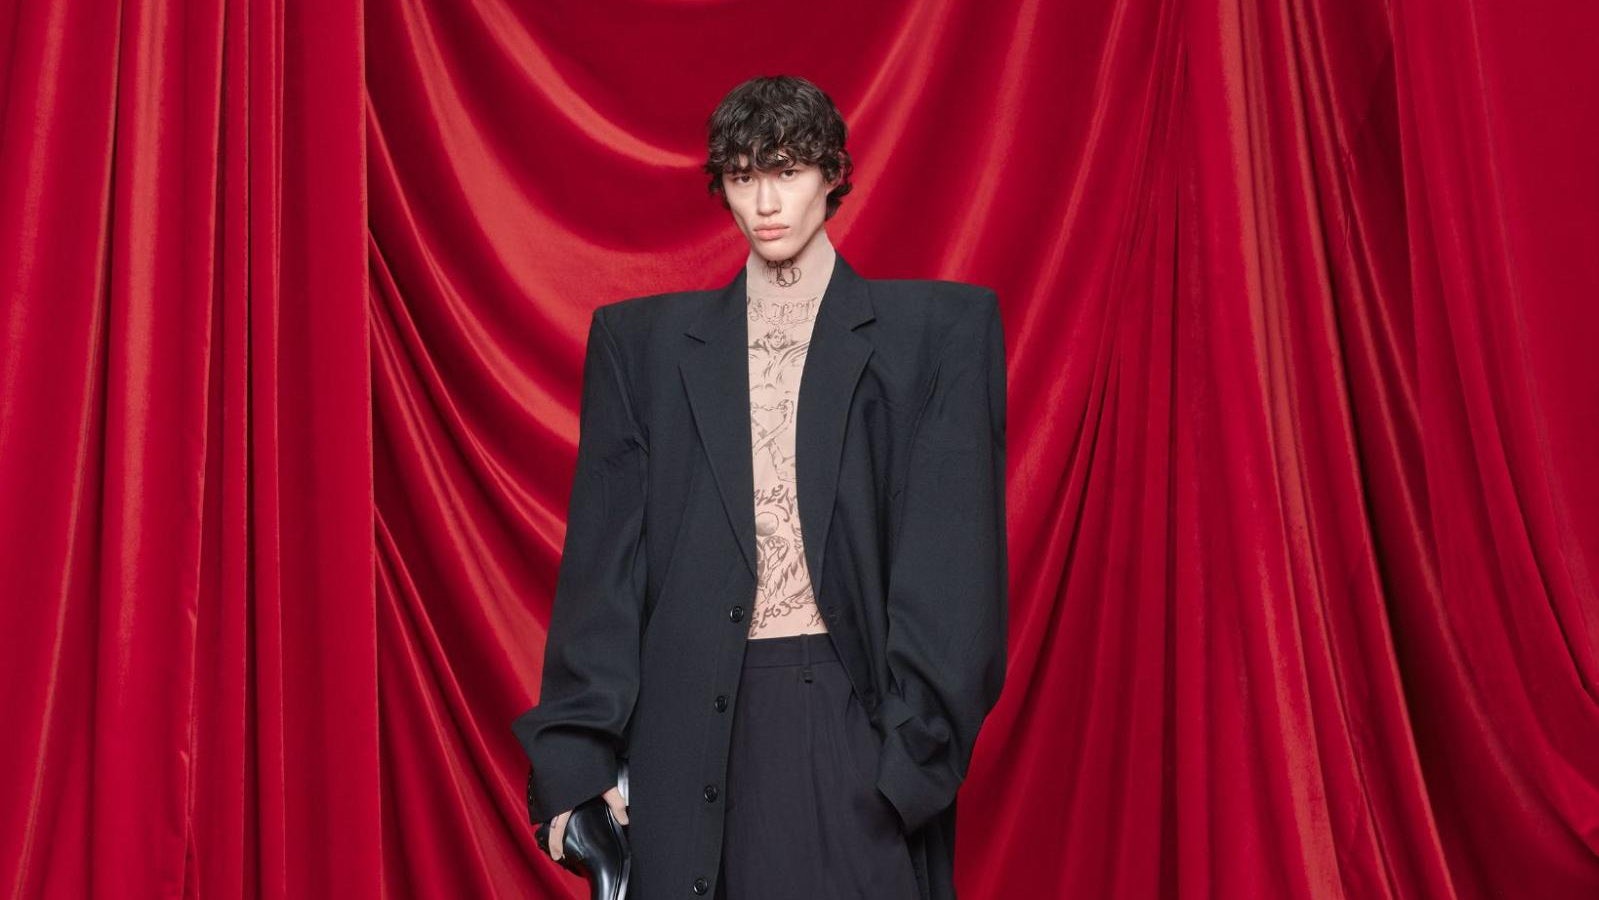 Balenciaga unveiled its Summer 24 collection at Paris Fashion Week on October 1 against a backdrop of sweeping red velvet curtains. Photo: Balenciaga 